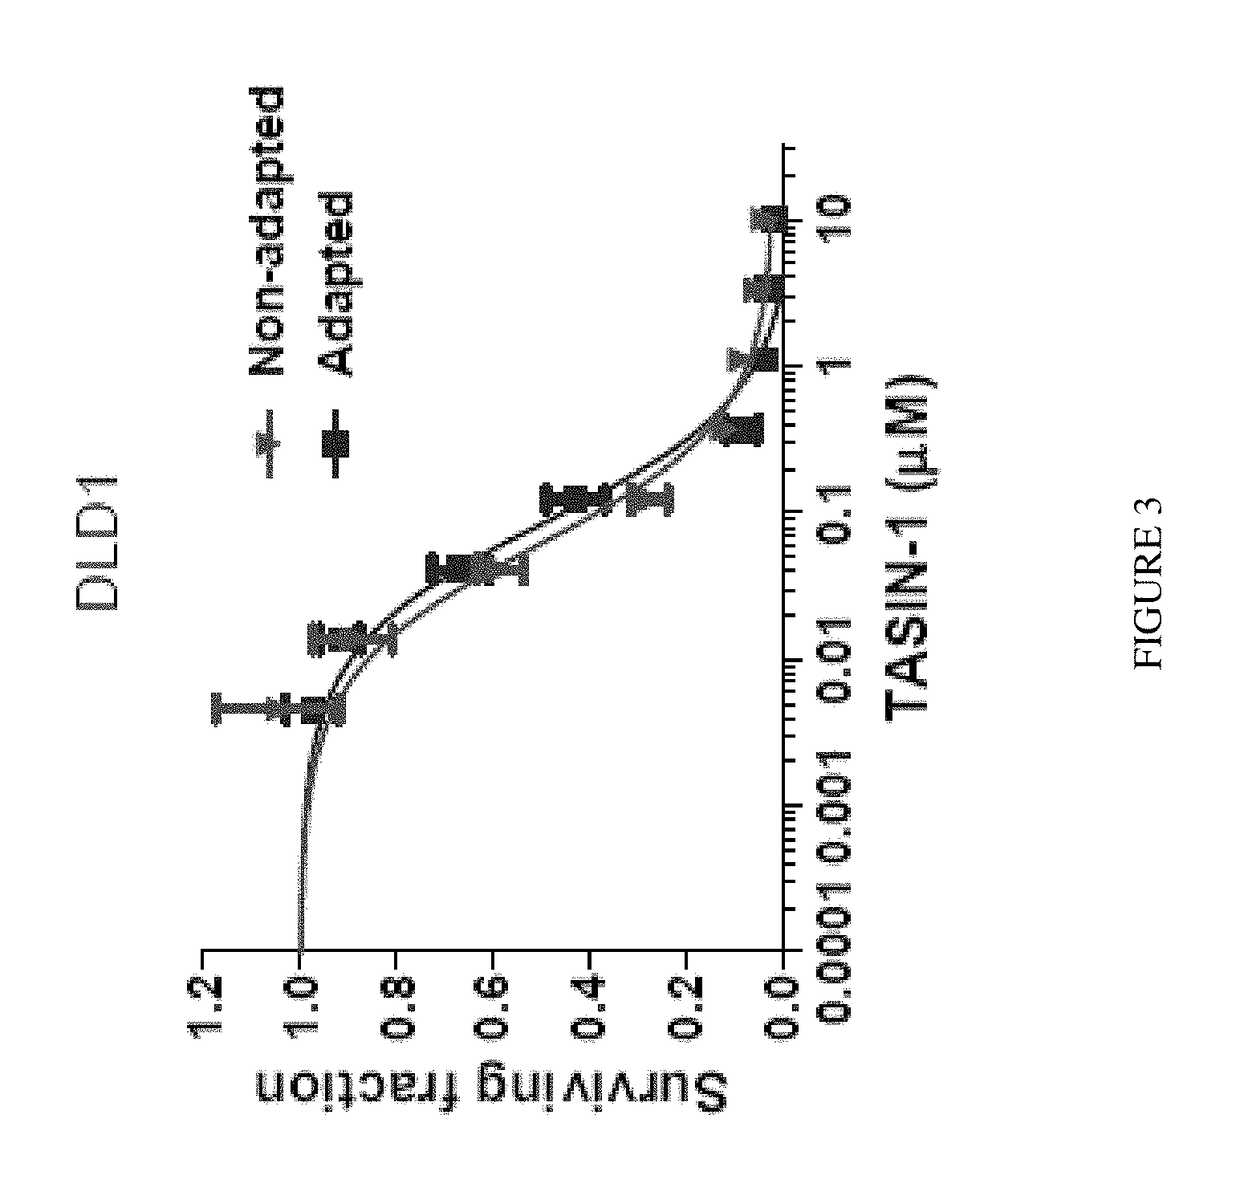 Targeting emopamil binding protein (EBP) with small molecules that induce an abnormal feedback response by lowering endogenous cholesterol biosynthesis